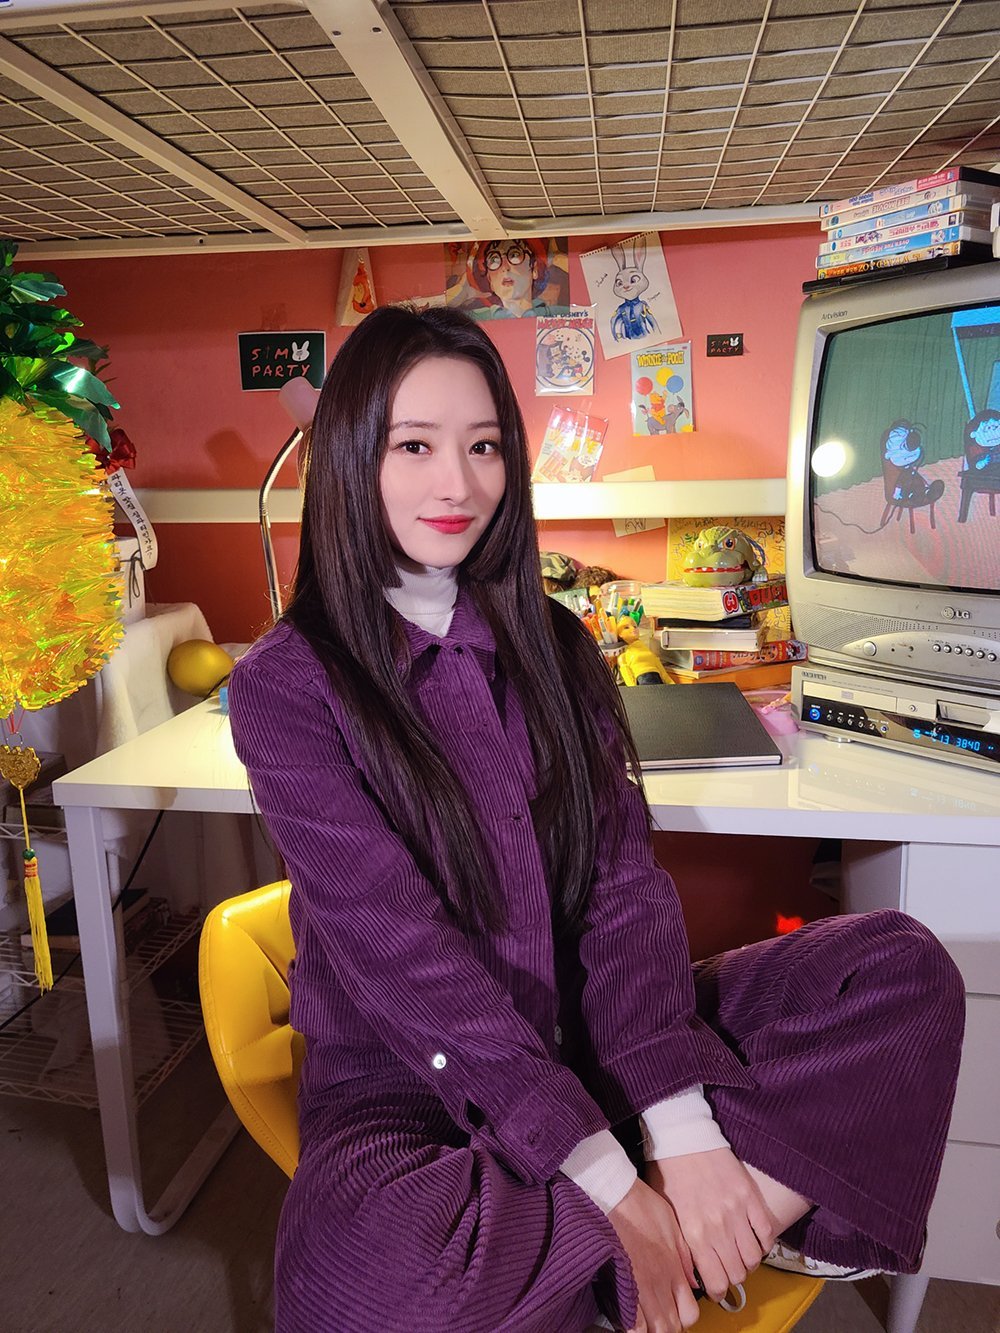 [201208] hf_dreamcatcher Twitter Update (½):
“[?] Before you go look at photos of Dreamies❤️
#Sua’s cover video
Behind the scenes selfie release❗❗
If you want to see??
Maknae Sua❗❓
??
han.gl/XfEBs
”
Transl: 7-Dreamers HojuneTL | Please do not take...